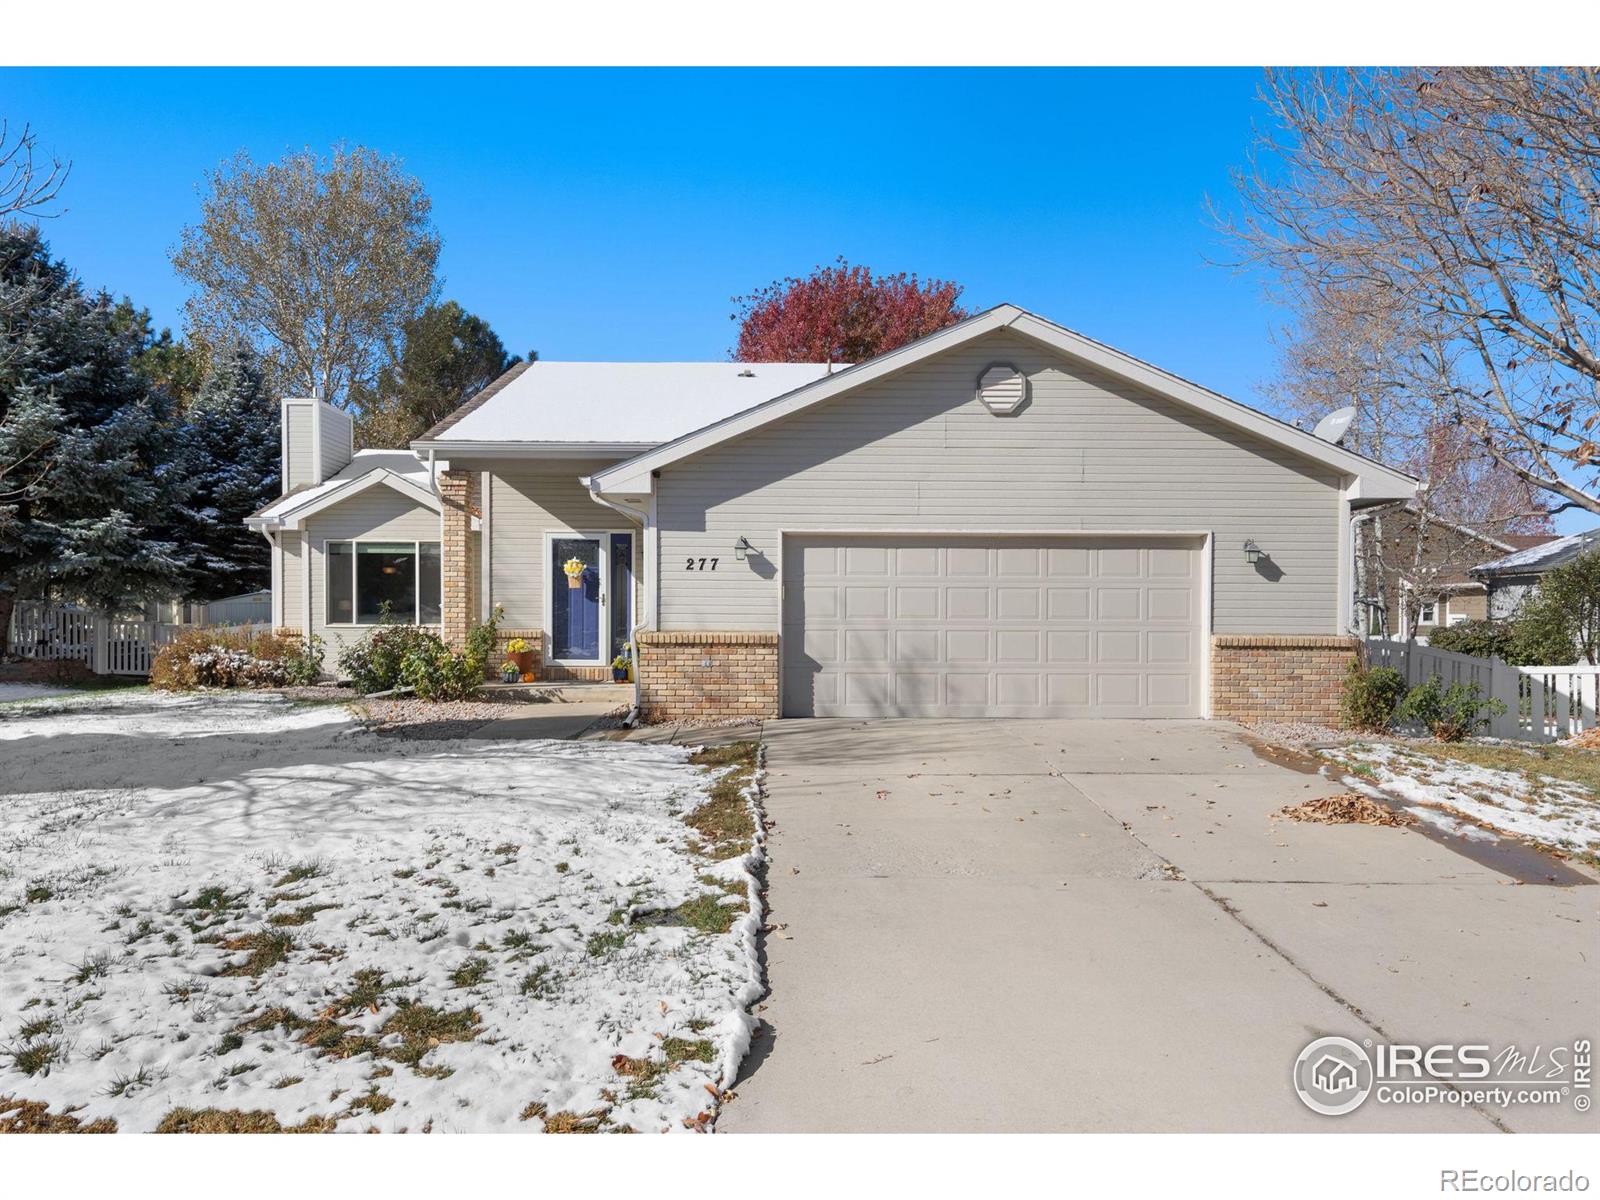 277  61st Avenue, greeley MLS: 456789999090 Beds: 5 Baths: 3 Price: $495,000